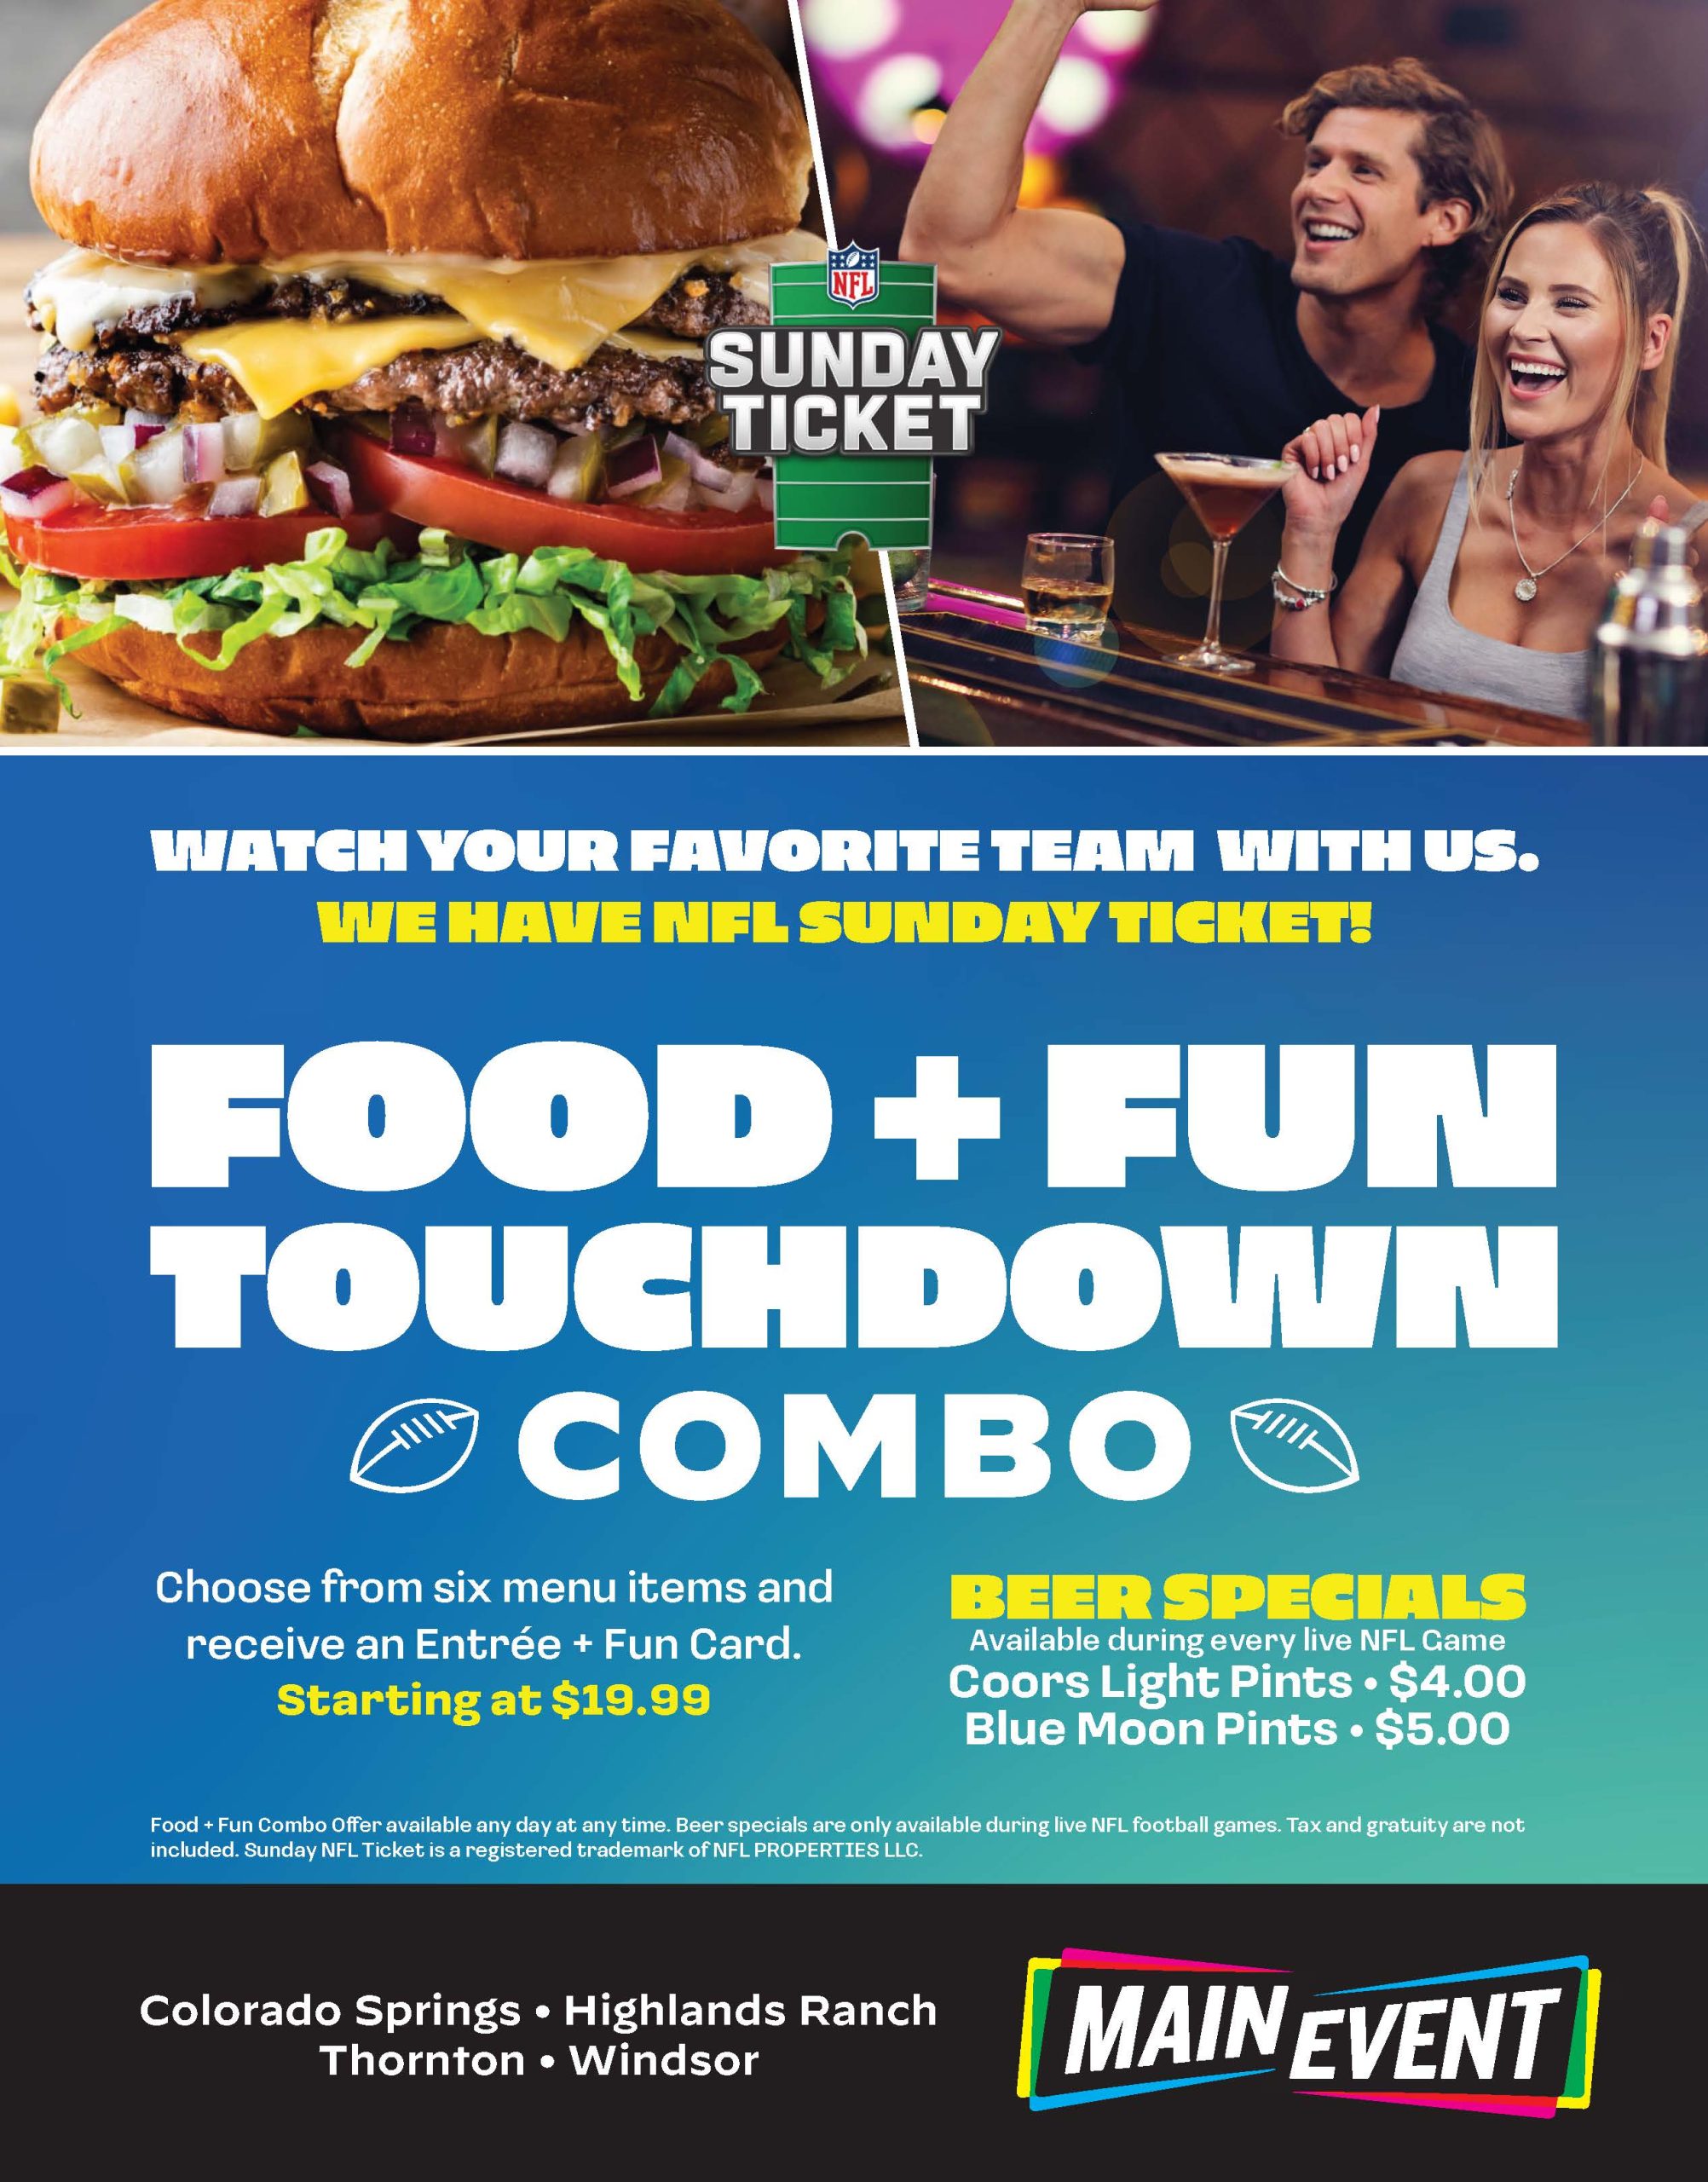 Food + Fun Touchdown Combo: Choose from six menu items and receive an Entree + Fun Card starting at $19.99. Beer specials during live NFL games, too.